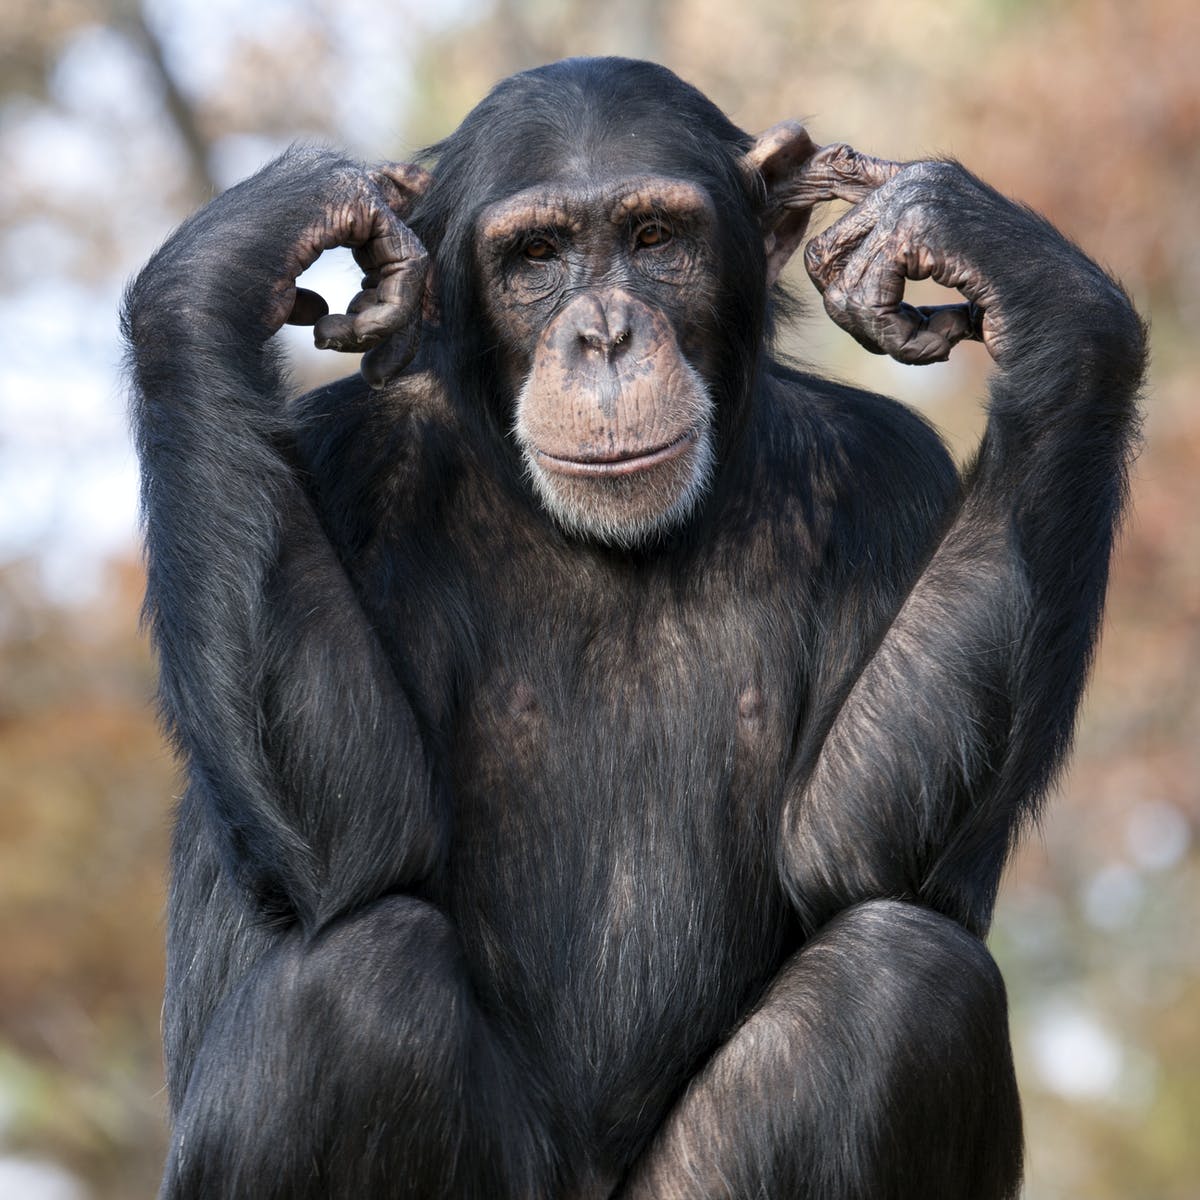 Which animals have the best working memory?